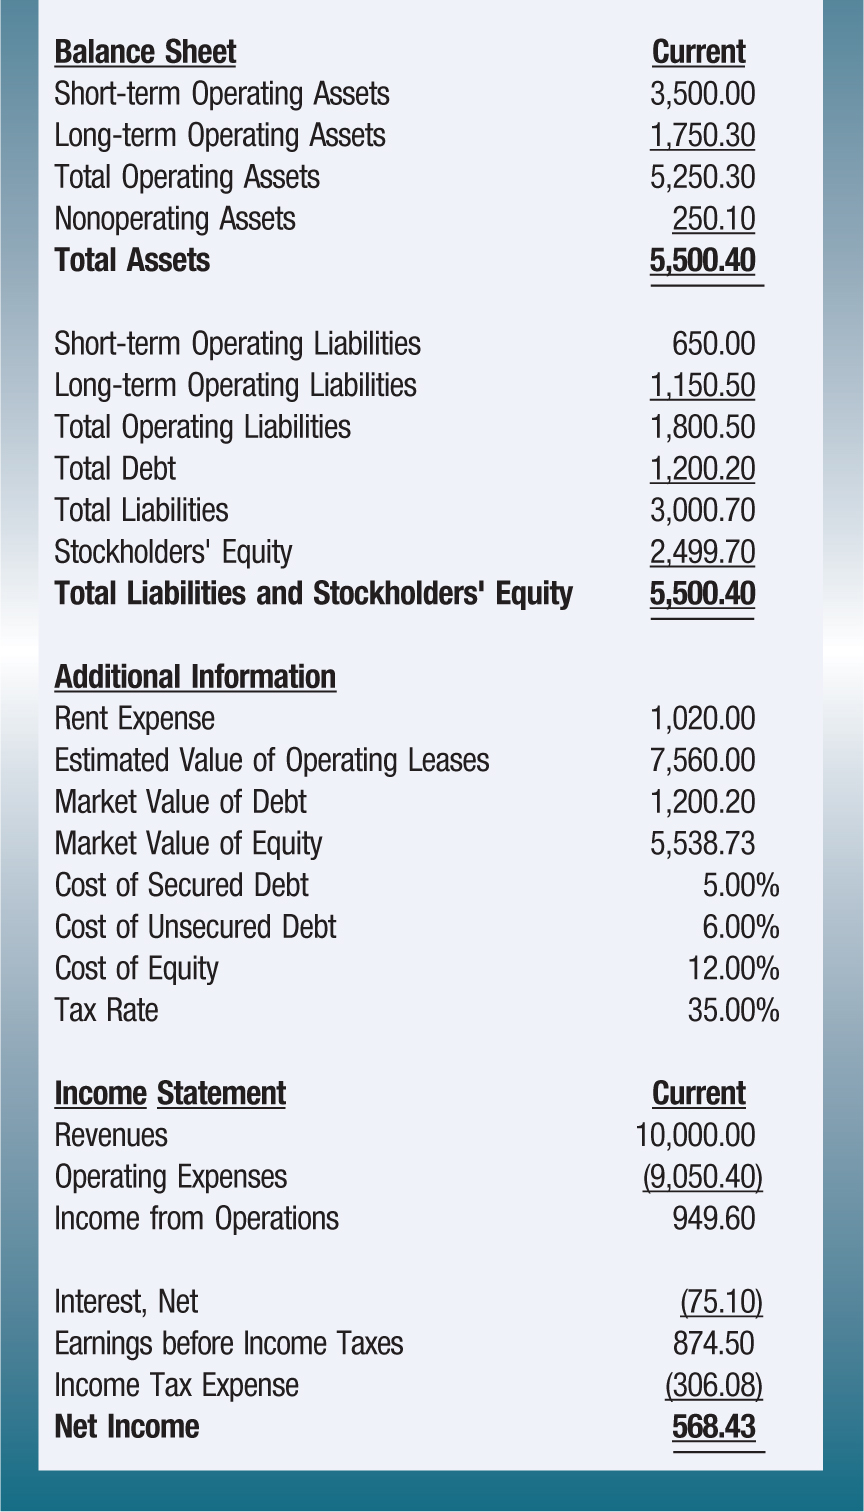 Balance Sheet; Current Short-term Operating Assets; 3,500.00 Long-term Operating Assets; 1,750.30 Total Operating Assets; 5,250.30 Nonoperating Assets; 250.10 Total Assets; 5,500.40 Short-term Operating Liabilities; 650.00 Long-term Operating Liabilities; 1,150.50 Total Operating Liabilities; 1,800.50 Total Debt; 1,200.20 Total Liabilities; 3,000.70 Stockholders' Equity; 2,499.70 Total Liabilities and Stockholders' Equity; 5,500.40 Additional Information Rent Expense; 1,020.00 Estimated Value of Operating Leases; 7,560.00 Market Value of Debt; 1,200.20 Market Value of Equity; 5,538.73 Cost of Secured Debt; 5.00% Cost of Unsecured Debt; 6.00% Cost of Equity; 12.00% Tax Rate; 35.00% Income Statement; Current Revenues; 10,000.00 Operating Expenses; (9,050.40) Income from Operations; 949.60 Interest, Net; (75.10) Earnings before Income Taxes; 874.50 Income Tax Expense; (306.08) Net Income; 568.43